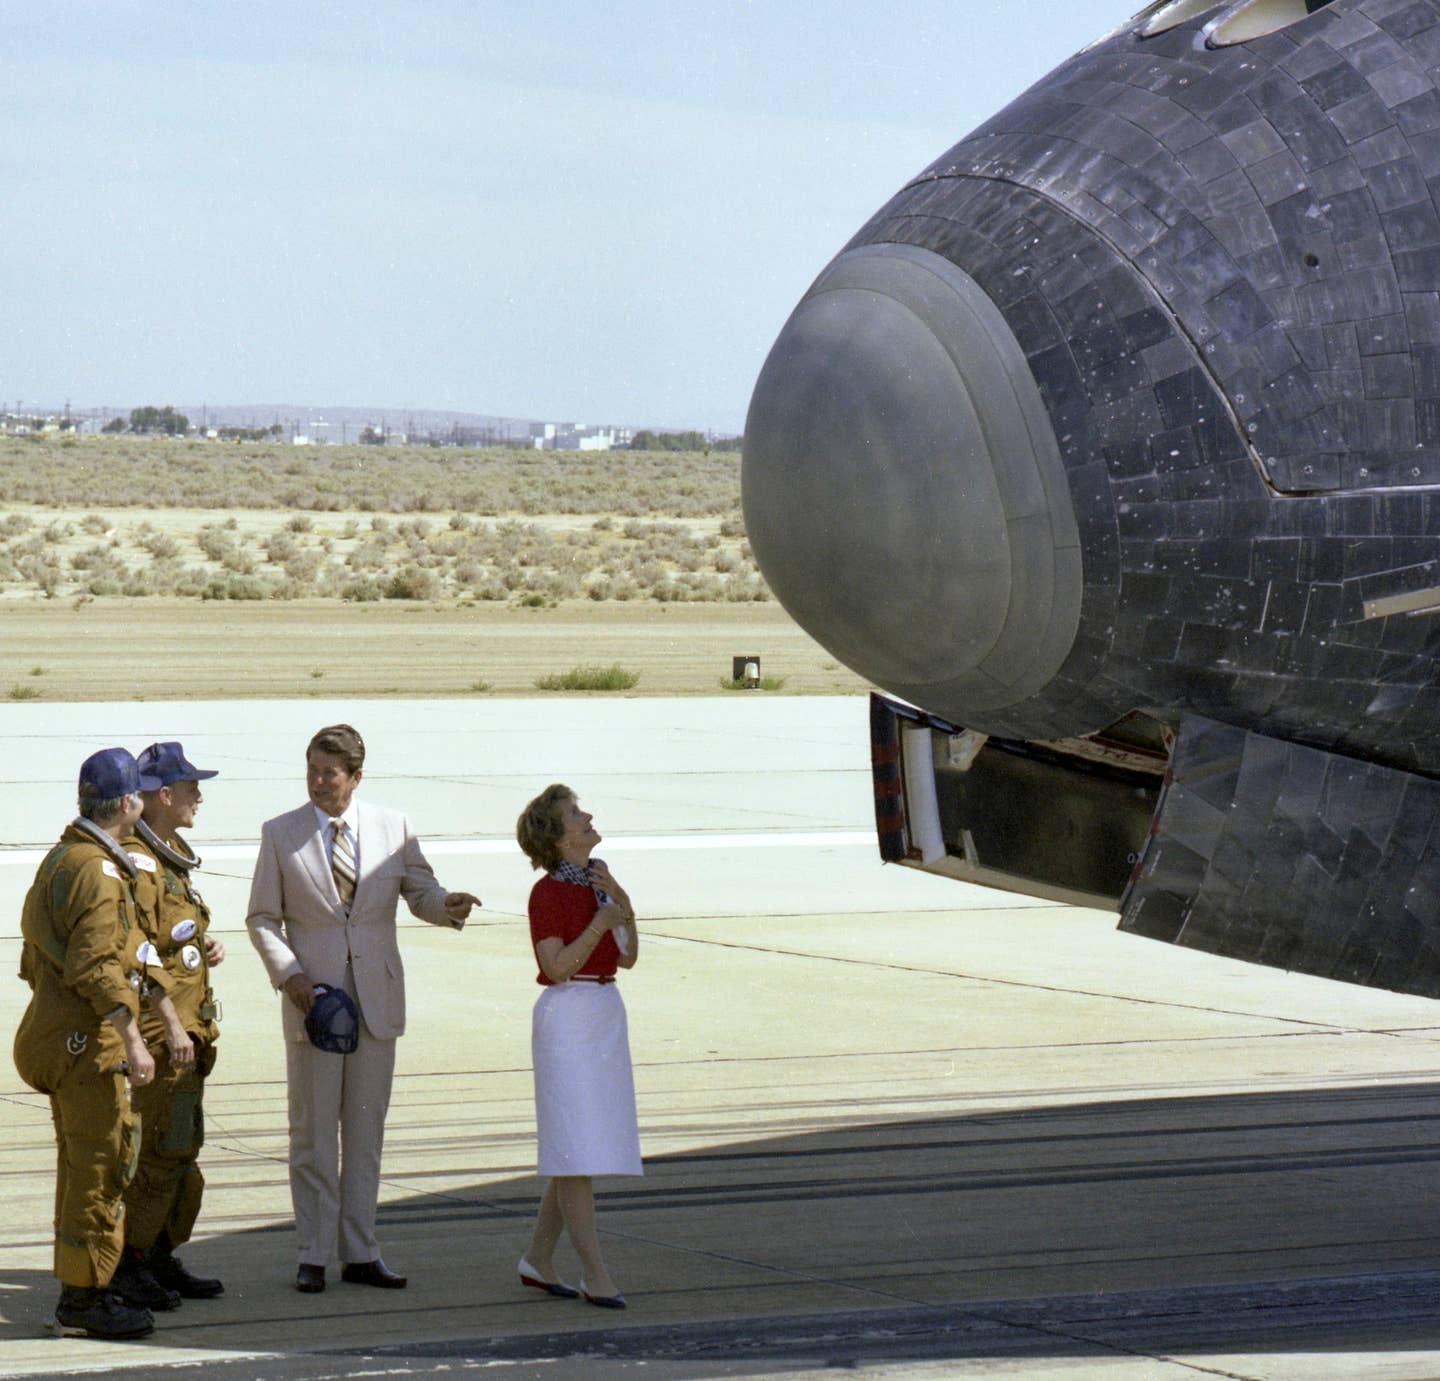 President and Mrs. Reagan chat with Mattingly and Hartsfield, both Auburn grads, after their return to Earth.